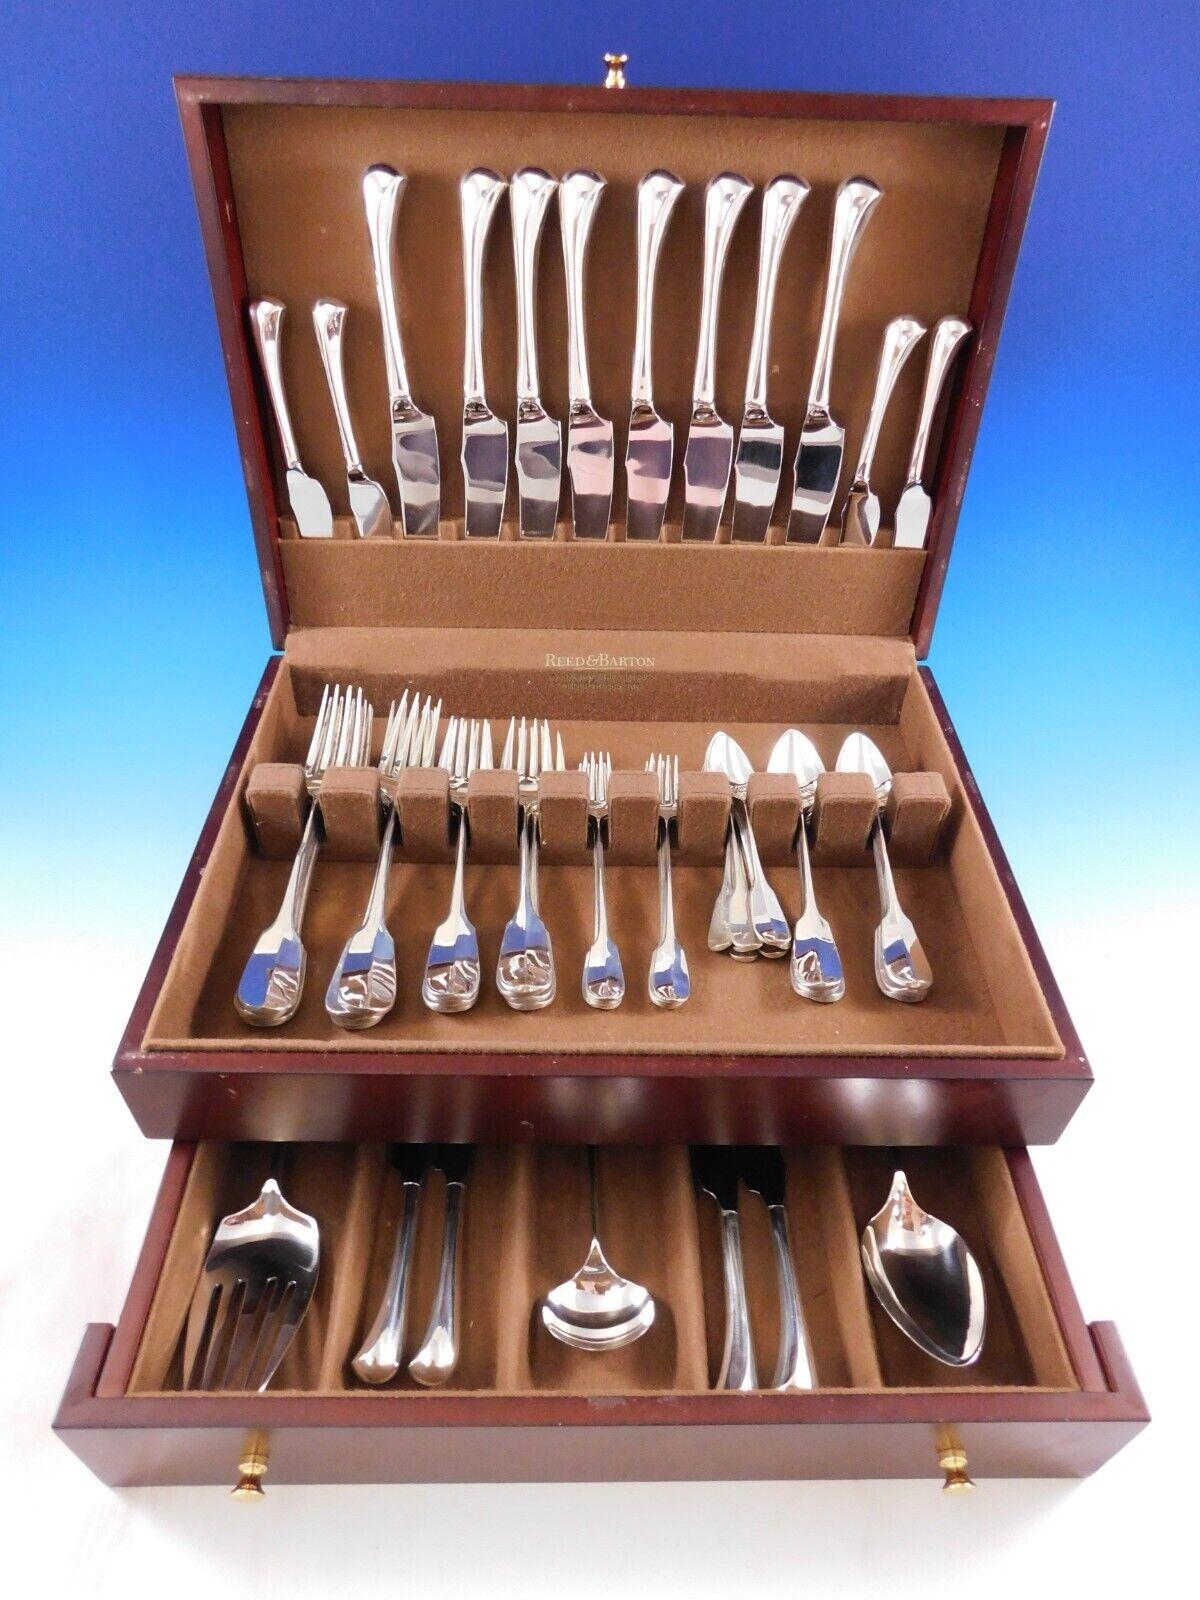 Superb Dinner Size Smithsonian by Stieff sterling silver Flatware set - 59 pieces. This set includes:


8 Dinner Knives w/pistol grip handles, 9